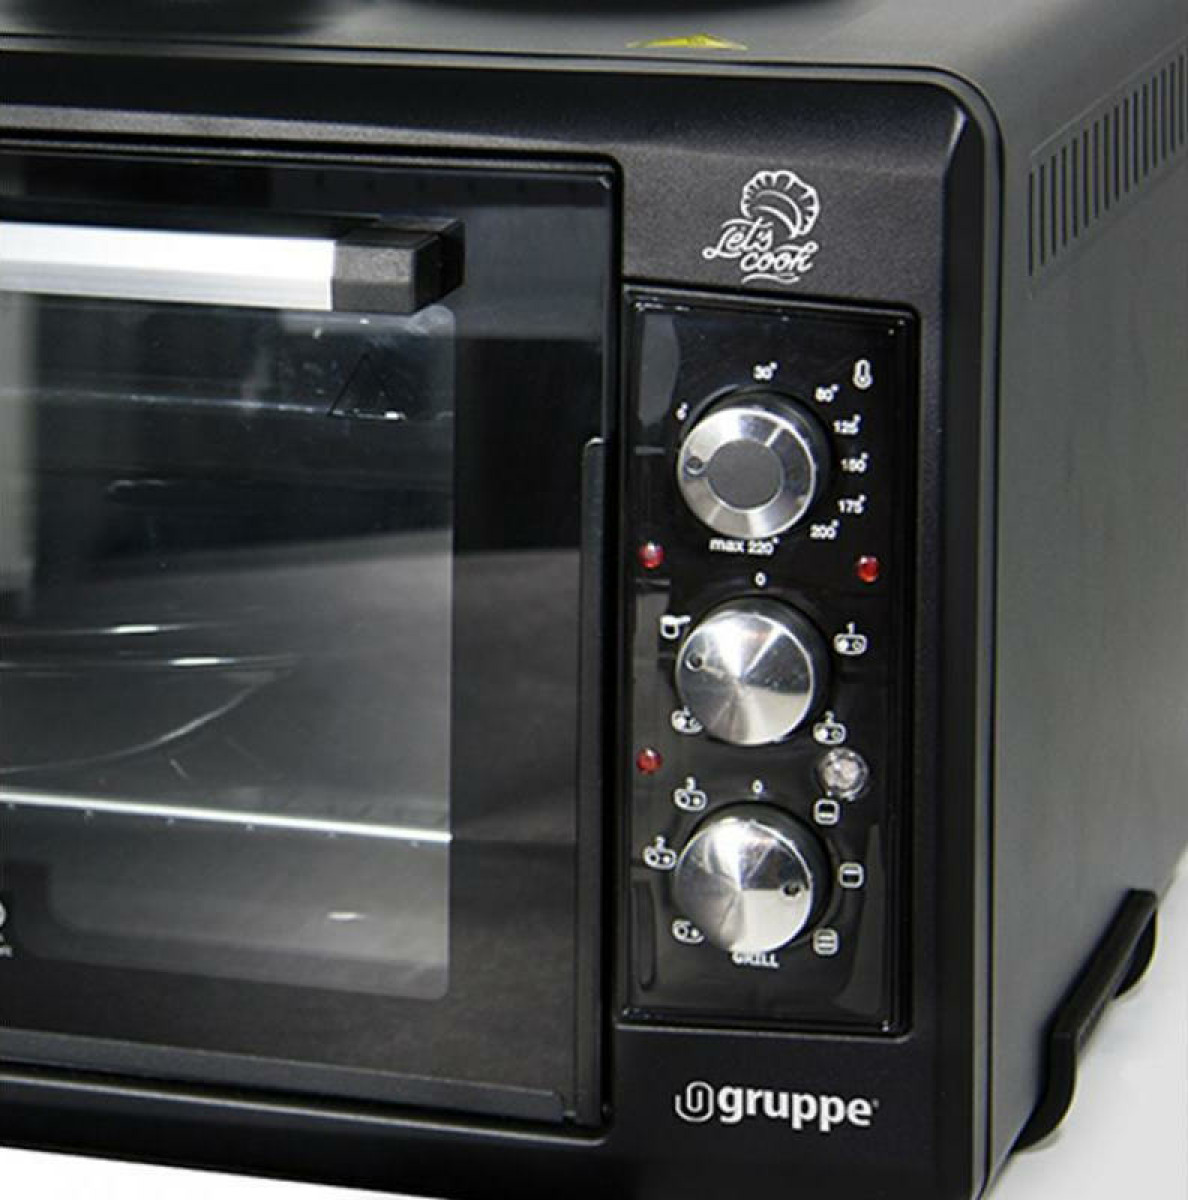 Gruppe AF 50 27 1 Electric Oven Open Box 2200 Watts